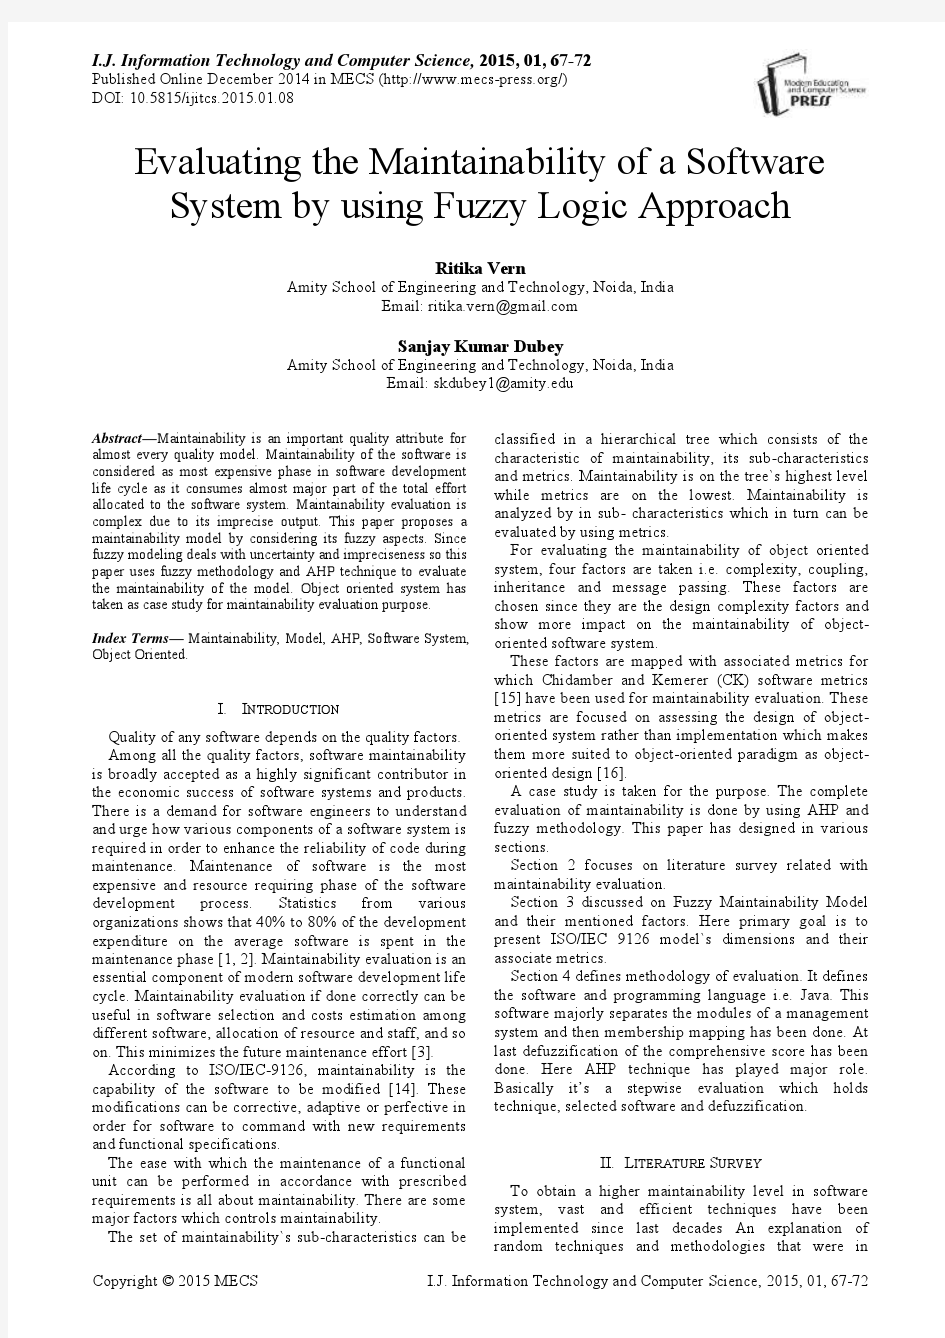 Evaluating the Maintainability of a Software System by using Fuzzy Logic Approach(IJITCS-V7-N1-8)